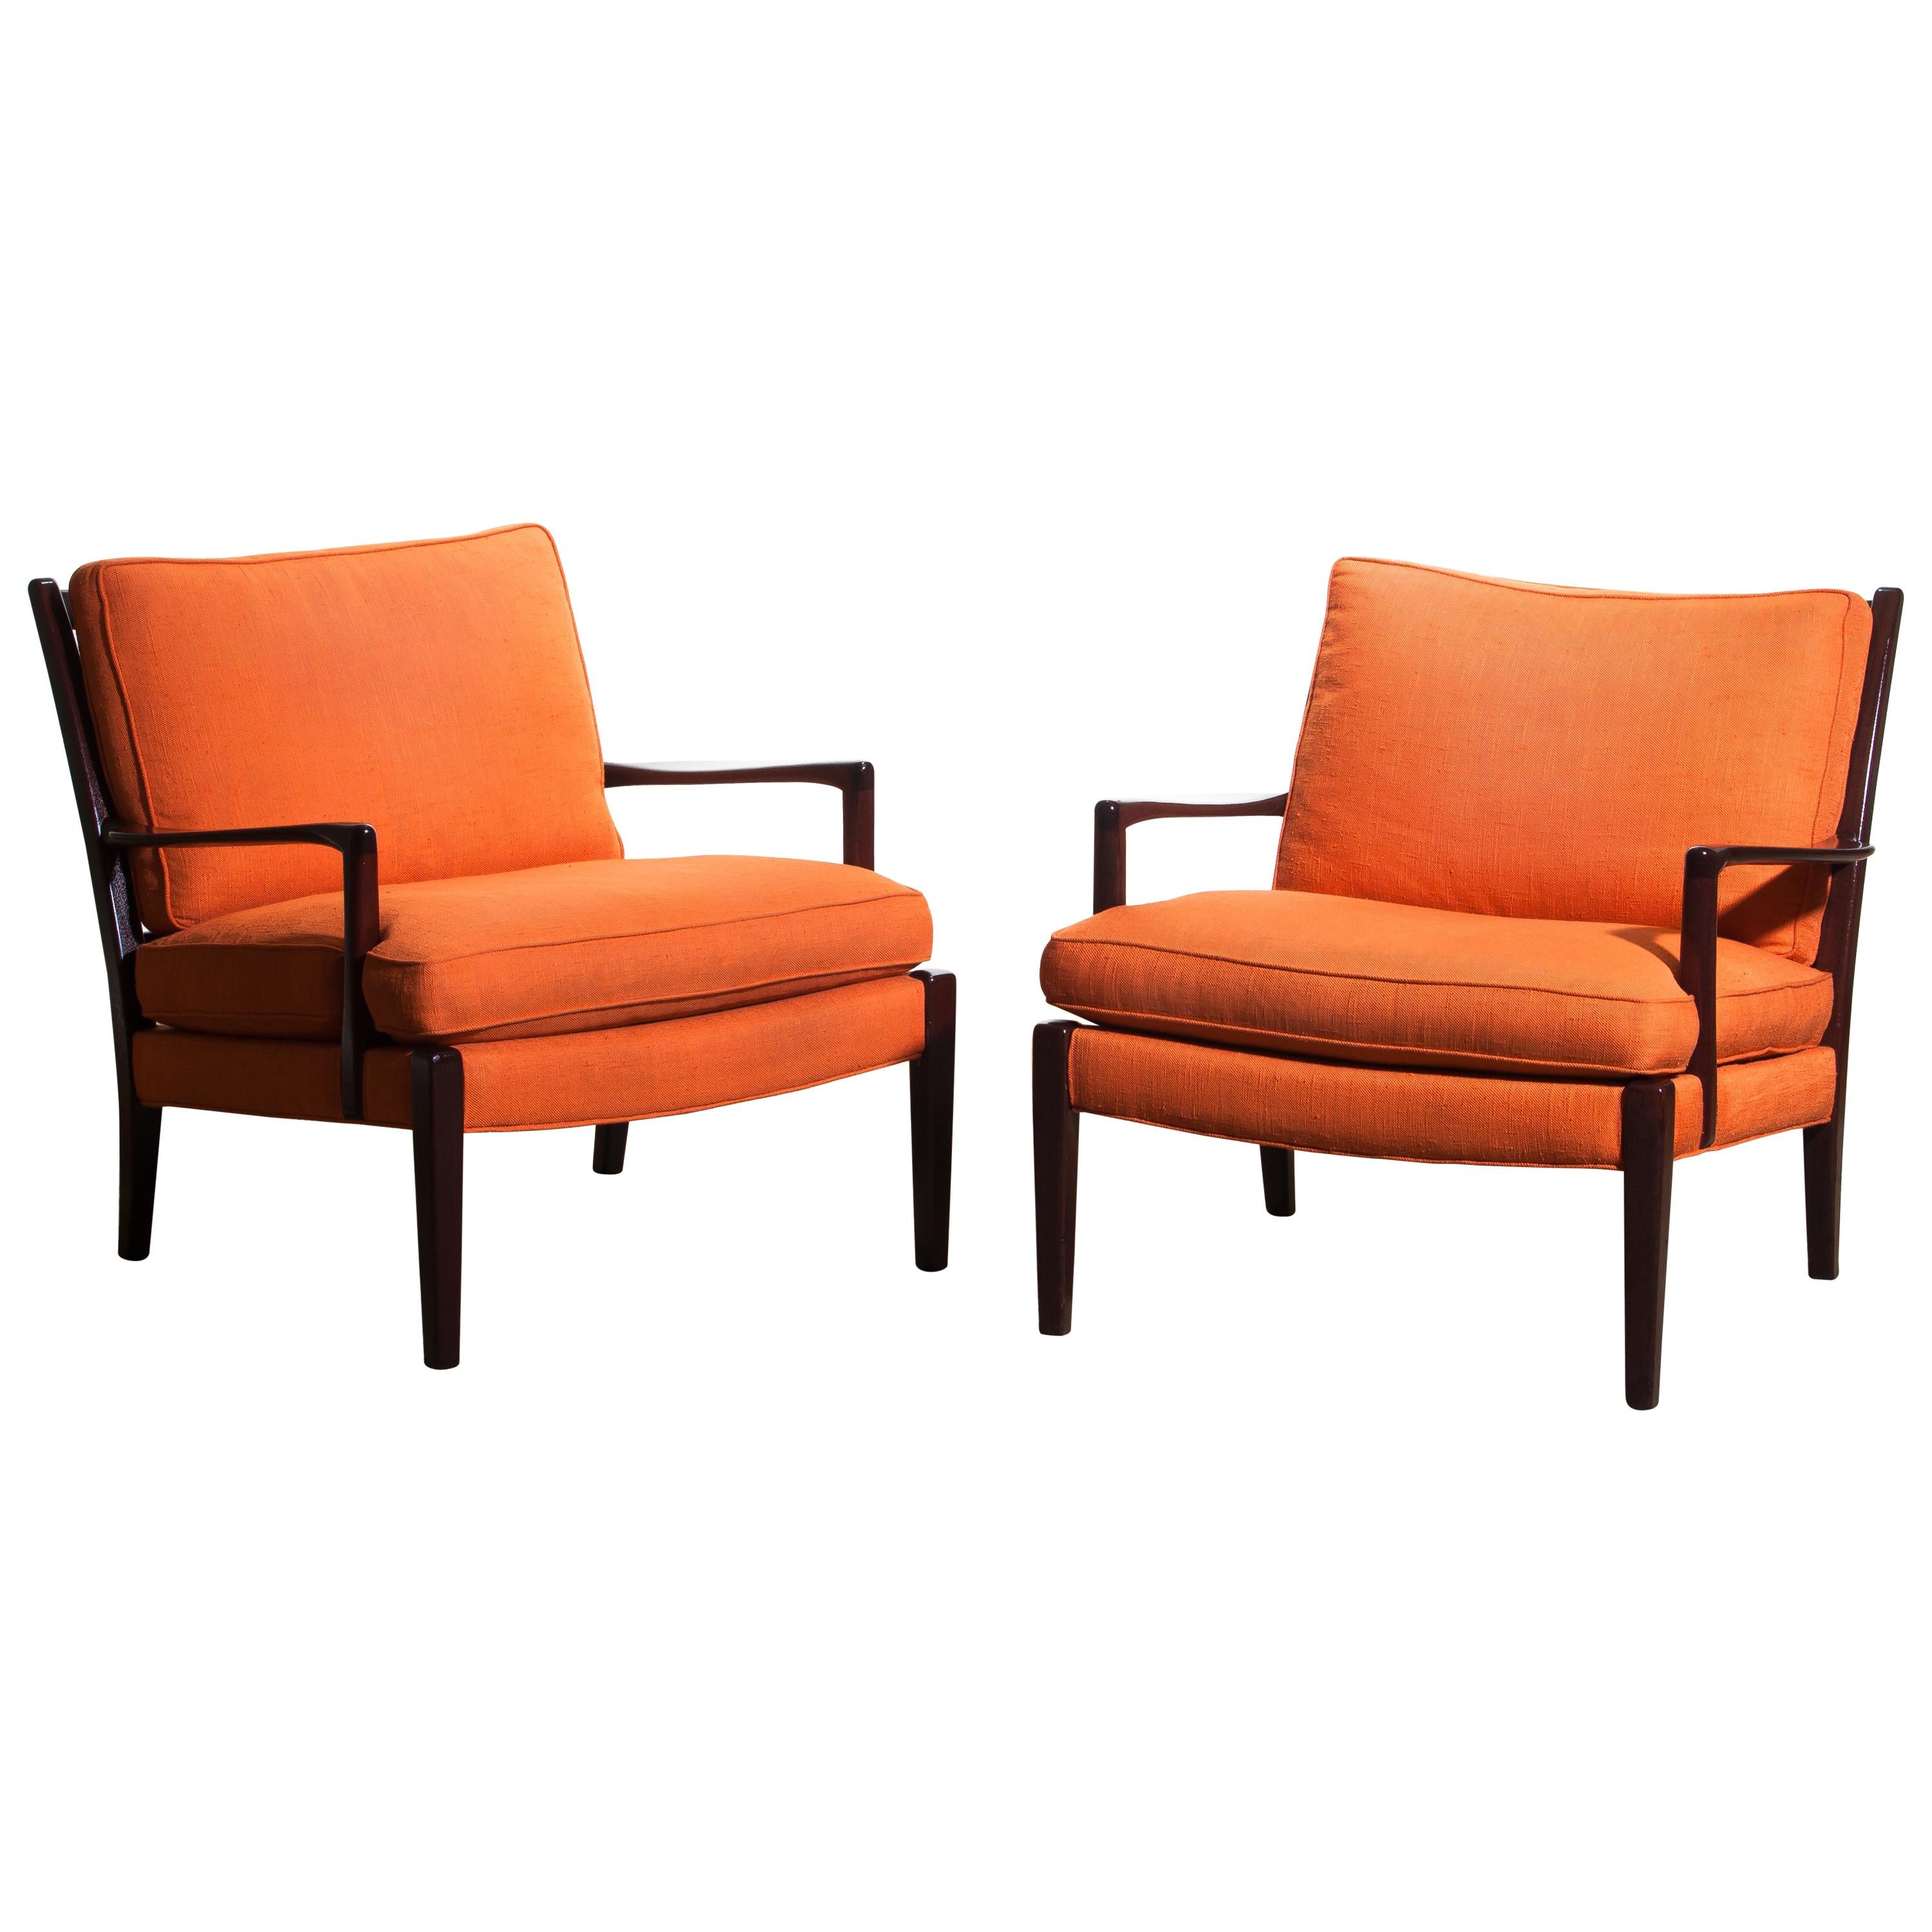 Beautiful set of two original orange colored linen easy / lounge chairs, model 